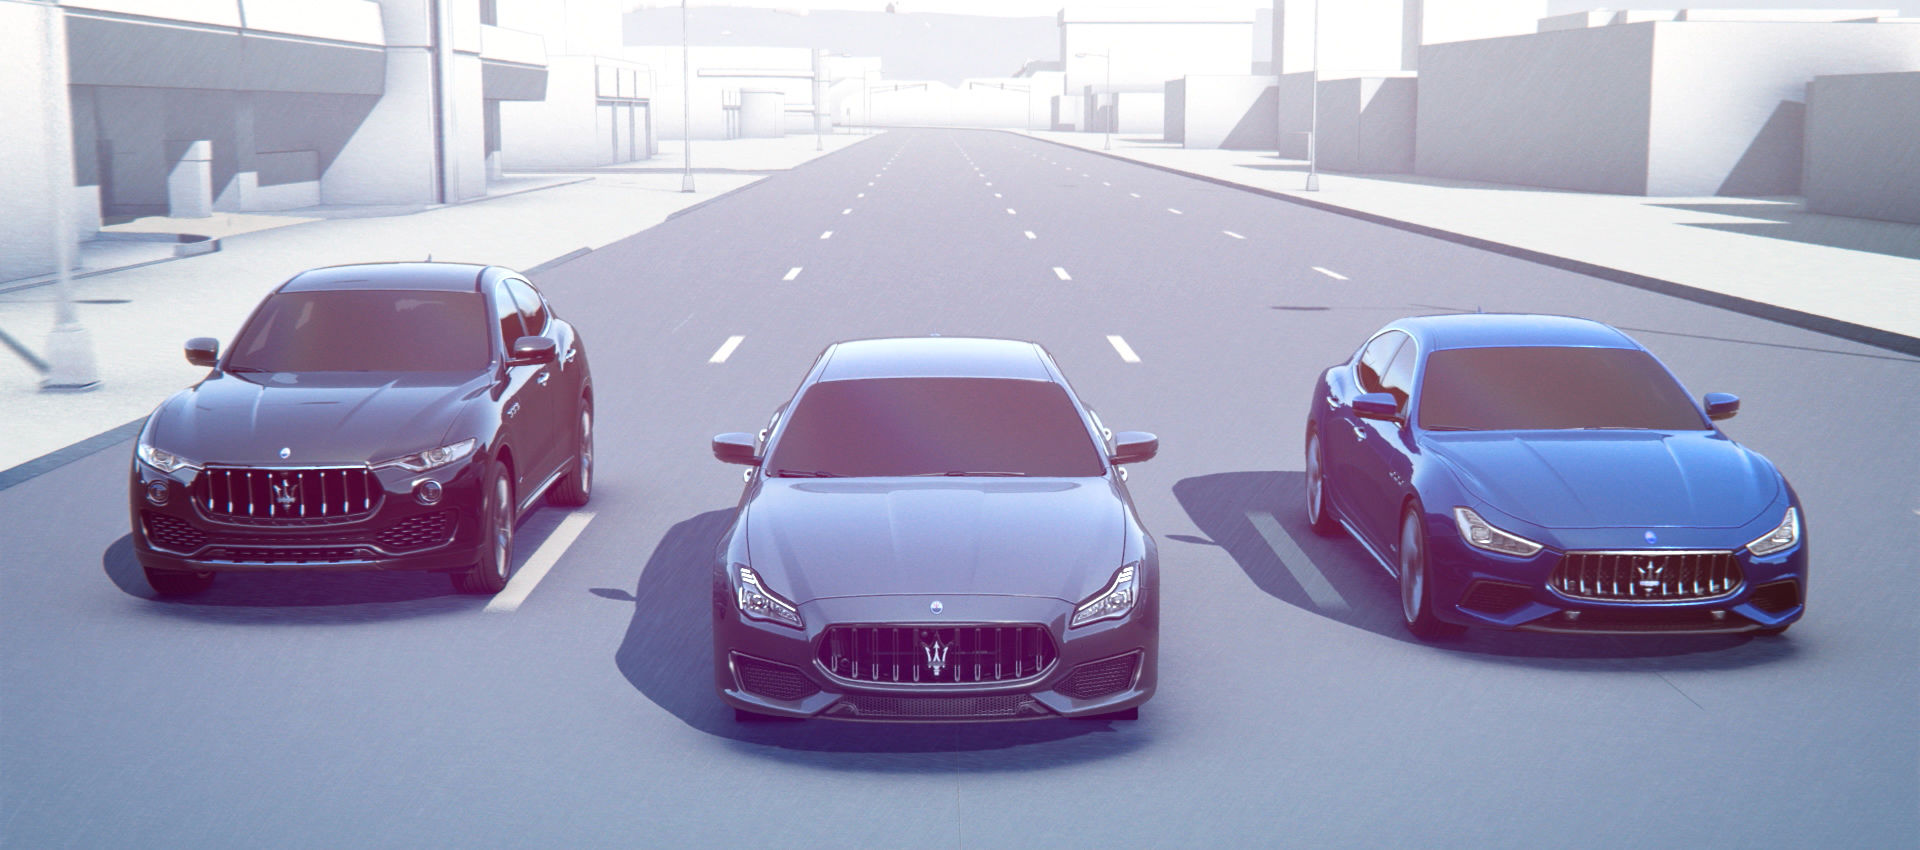 Highway Assist System - Maserati Levante, Ghibli and Quattroporte front view driving on a highway